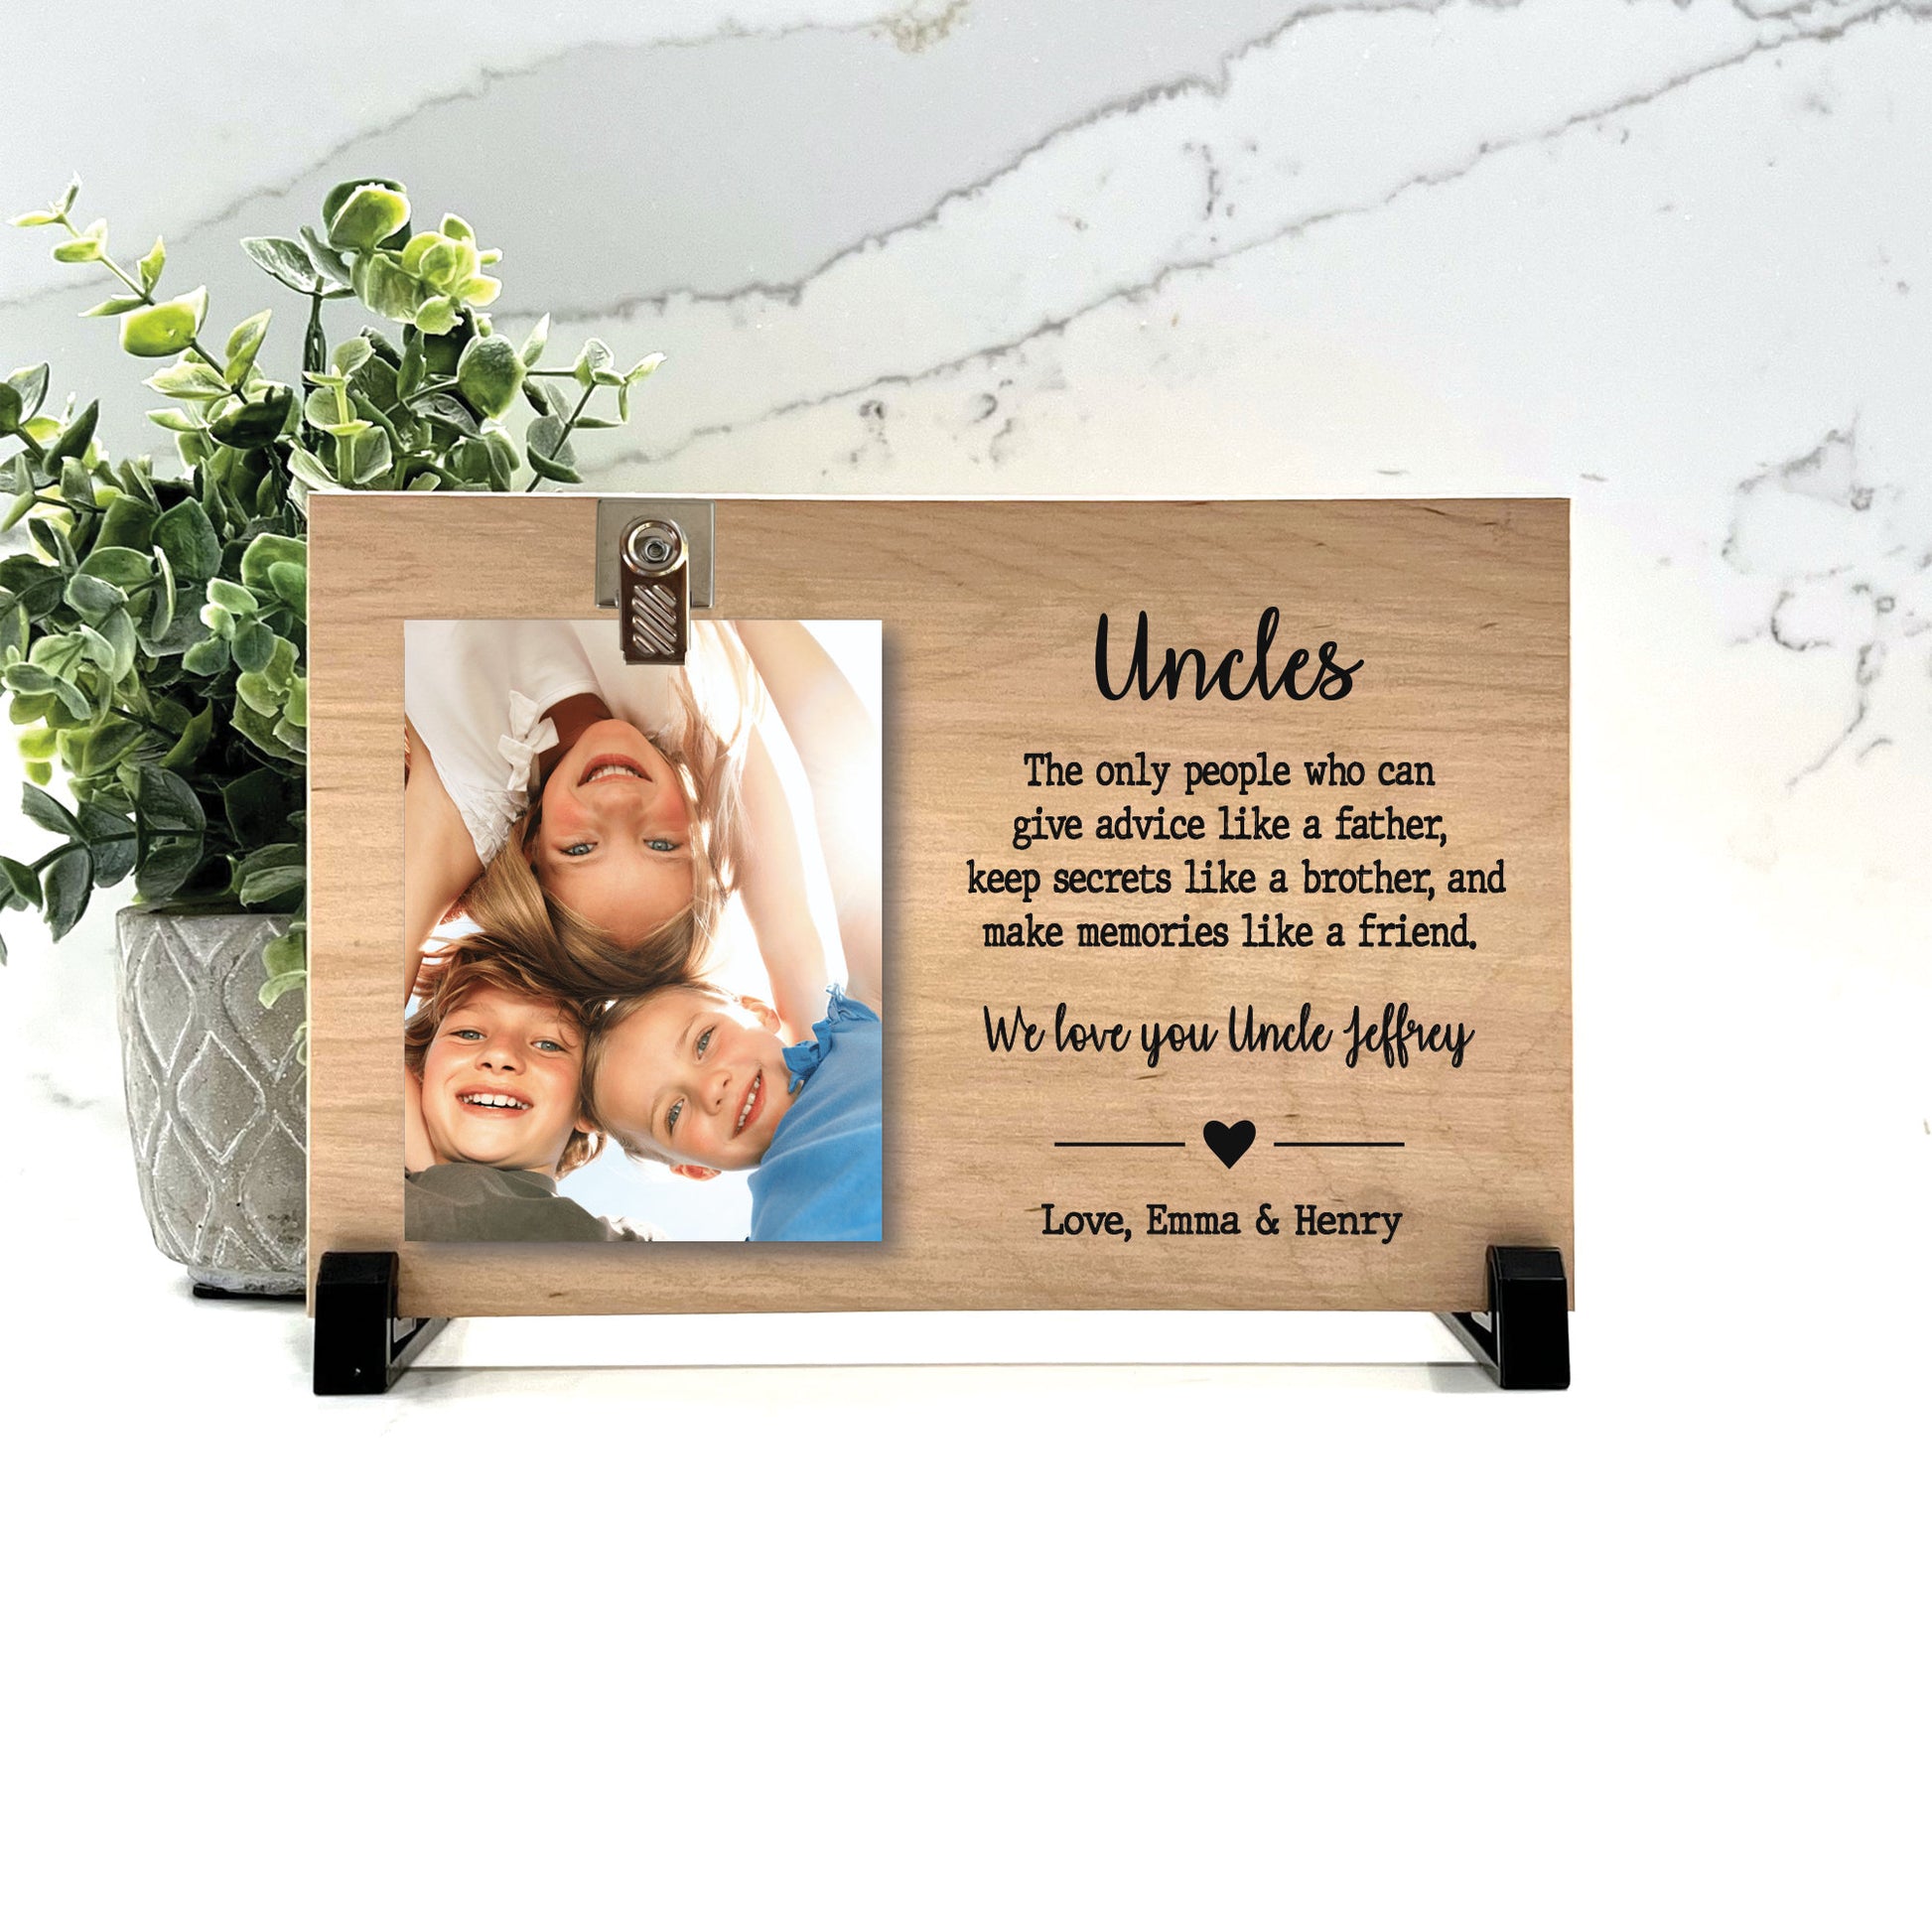 Customize your cherished moments with our Uncle Personalized Picture Frame available at www.florida-funshine.com. Create a heartfelt gift for family and friends with free personalization, quick shipping in 1-2 business days, and quality crafted picture frames, portraits, and plaques made in the USA."